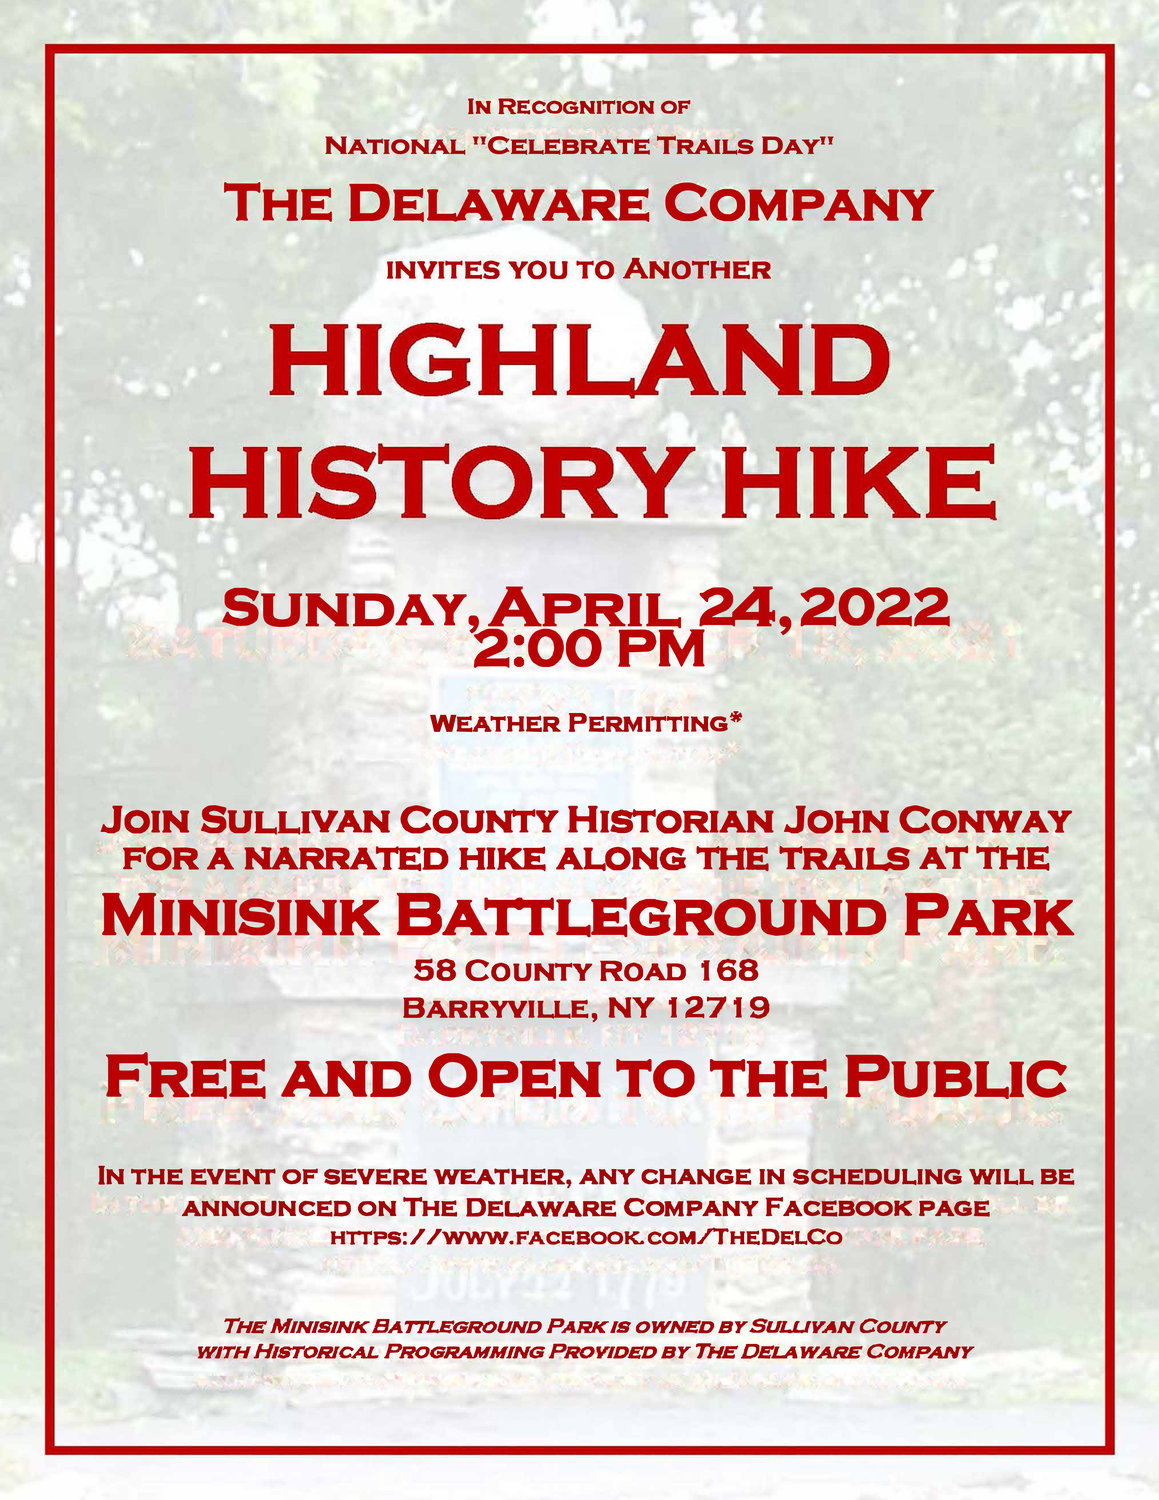 The Highland History Hike is Sunday, April 24 at 2 p.m. at the Minisink Battleground Park.